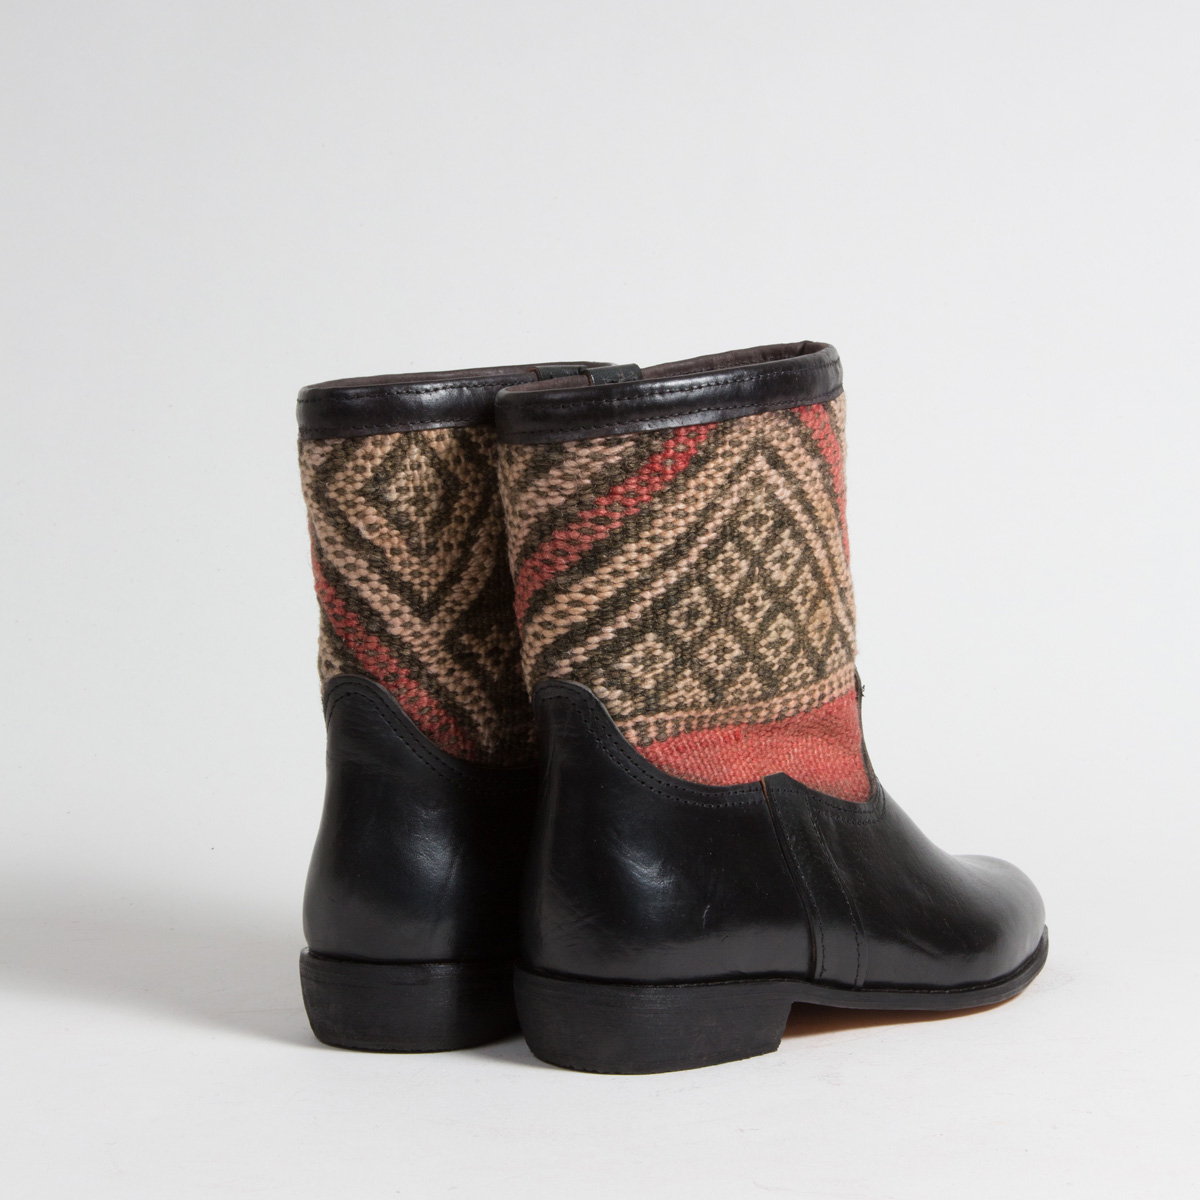 Bottines Kilim cuir mababouche artisanales (Réf. RPN33-42)